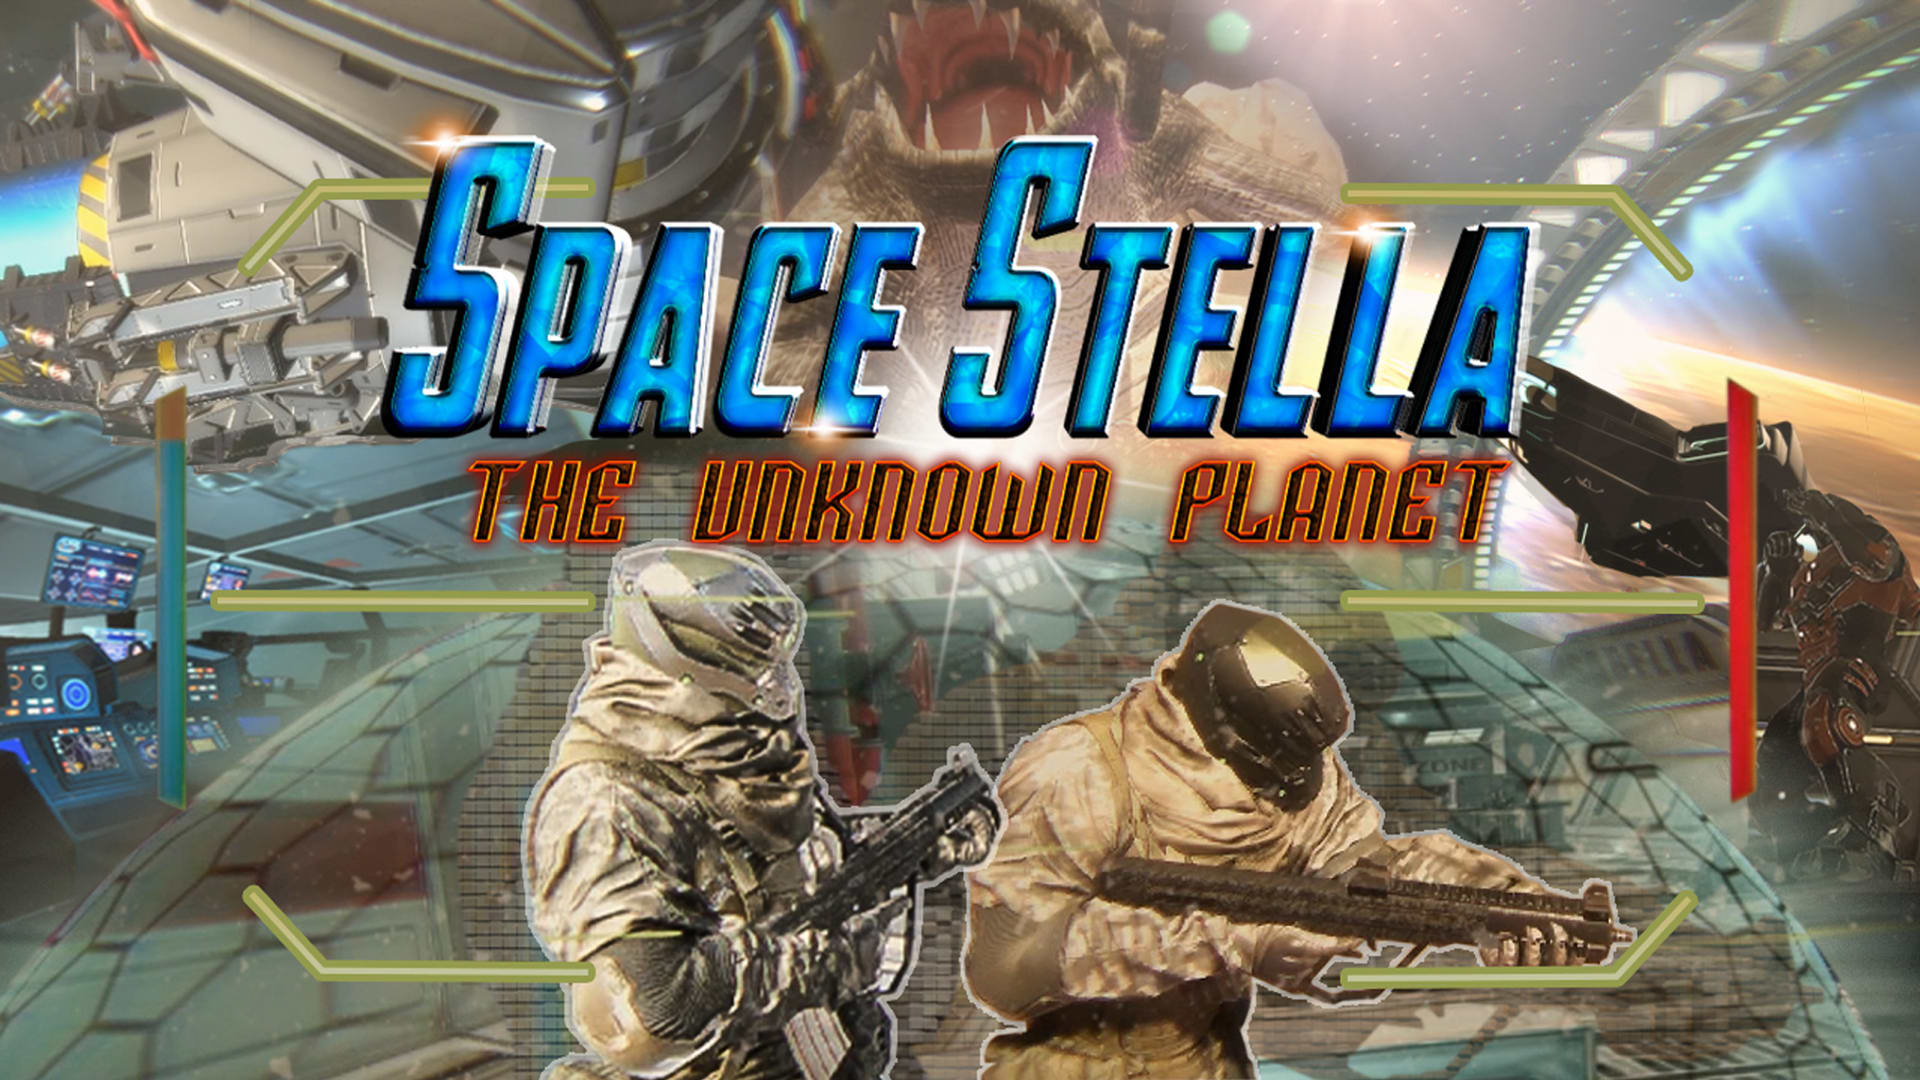 Space Stella: The Unknown Planet